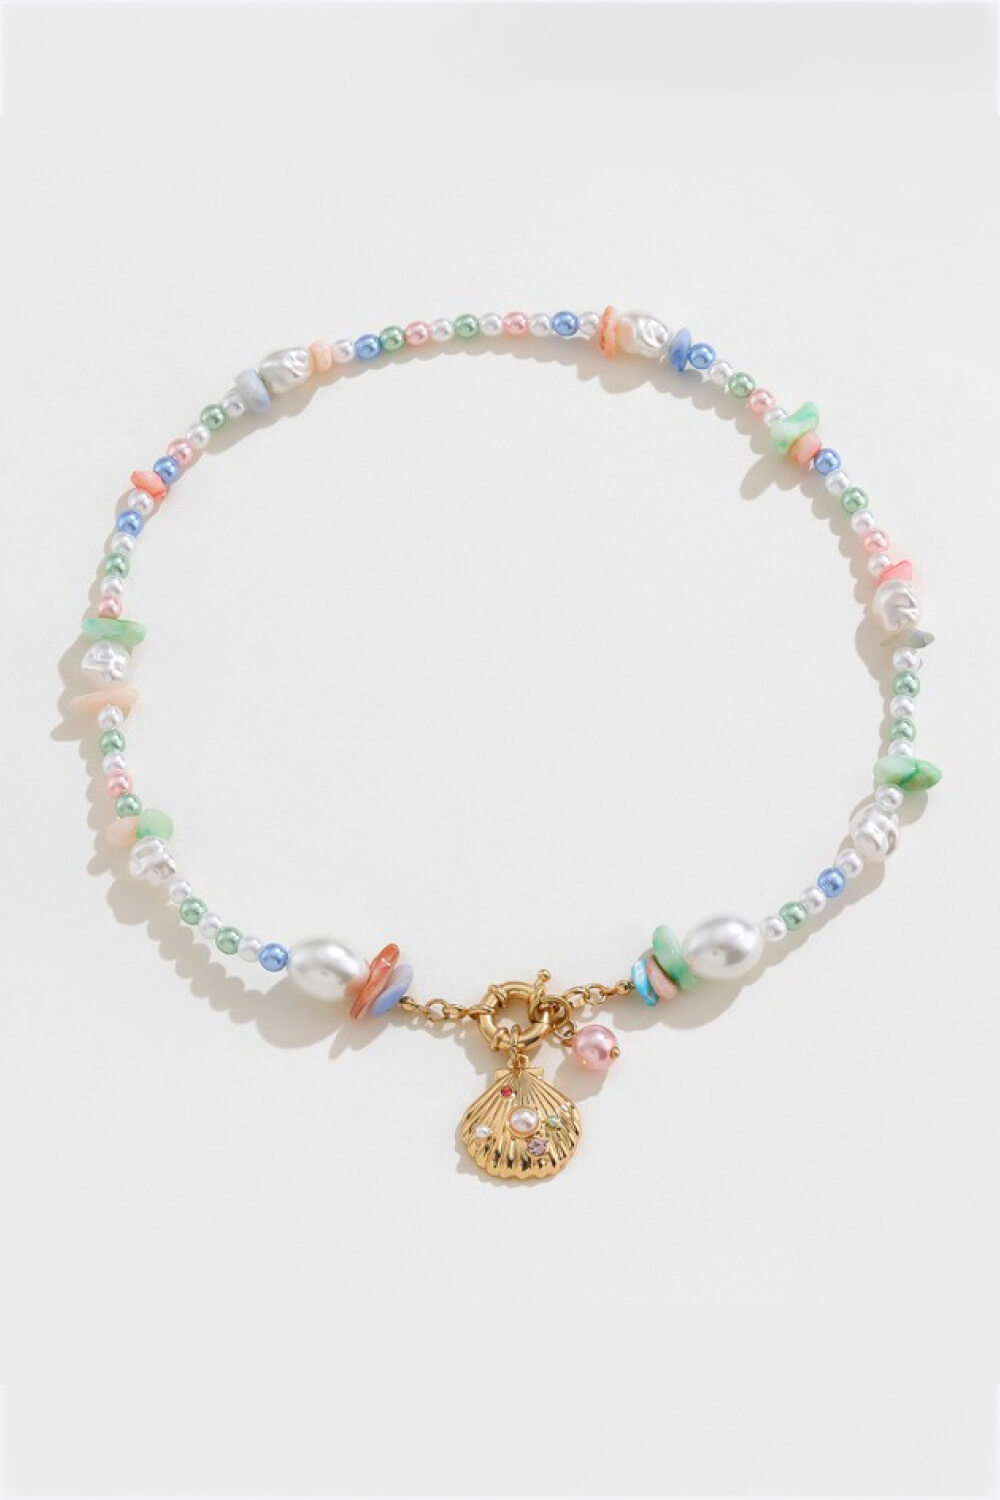 Colorful Synthetic Pearl Necklace - Necklaces - FITGGINS